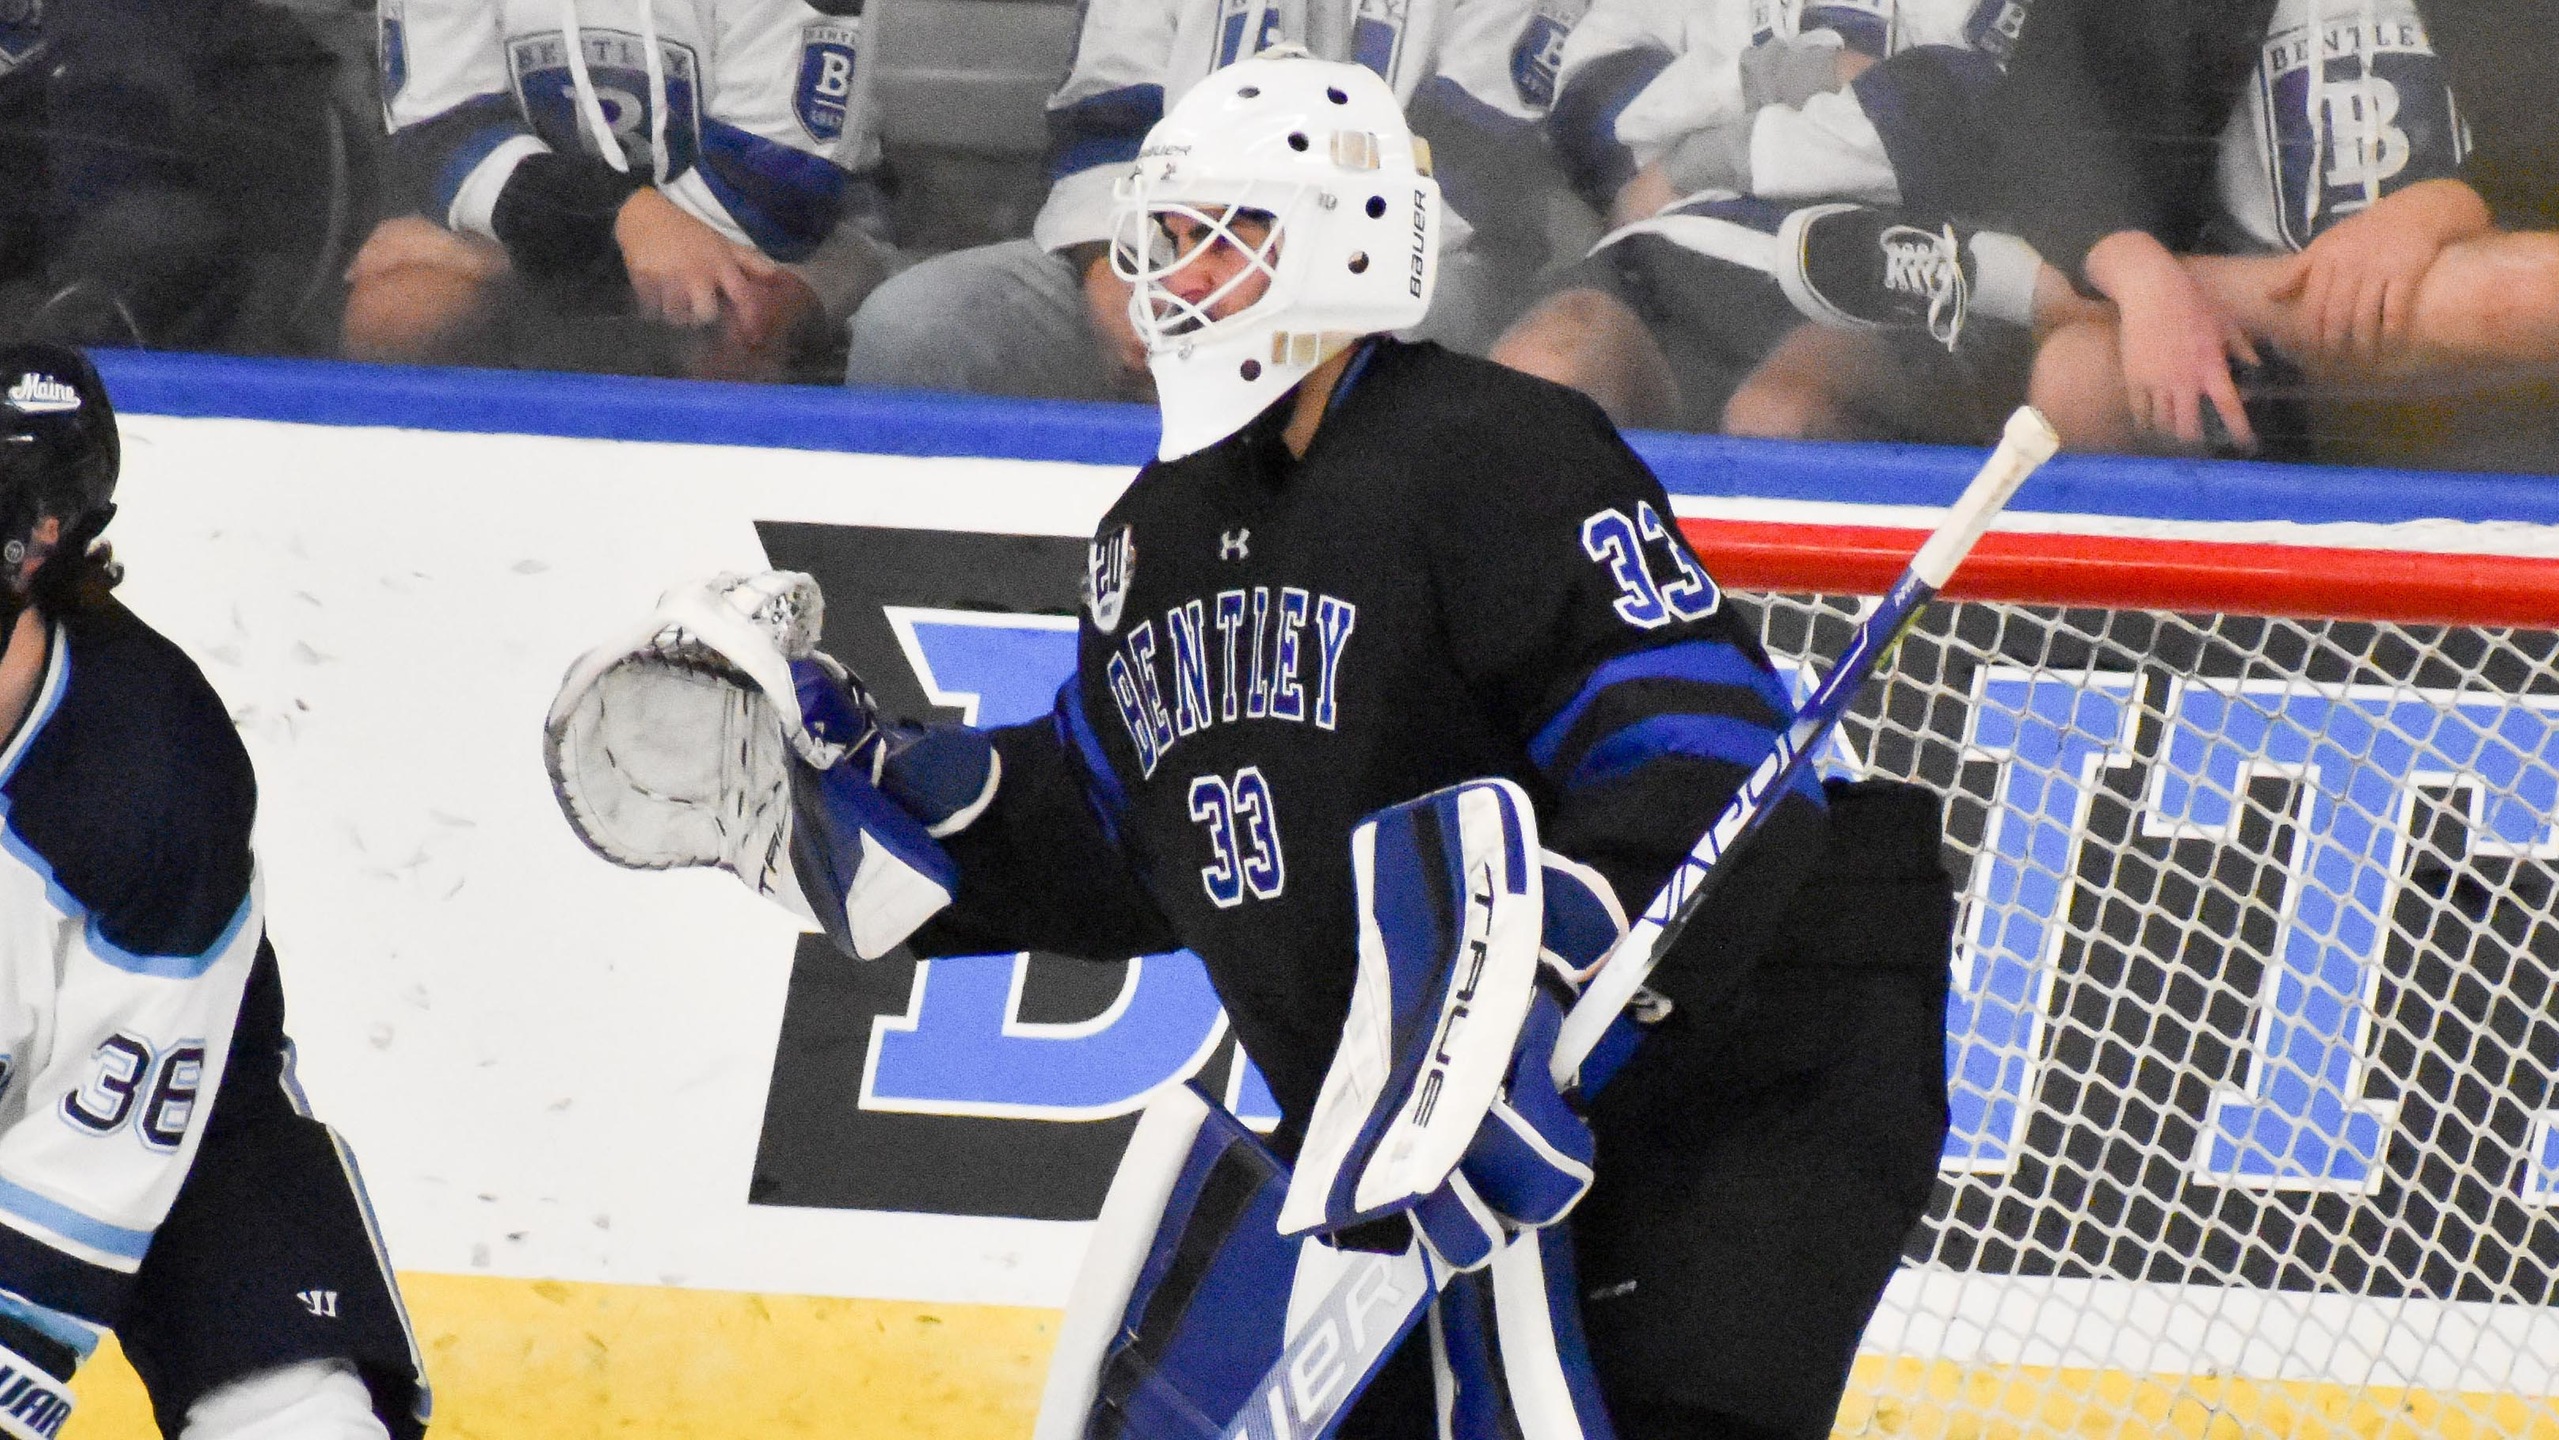 Air Force Tops Bentley 2-0 for Series Split; Hasley Makes 40 Saves